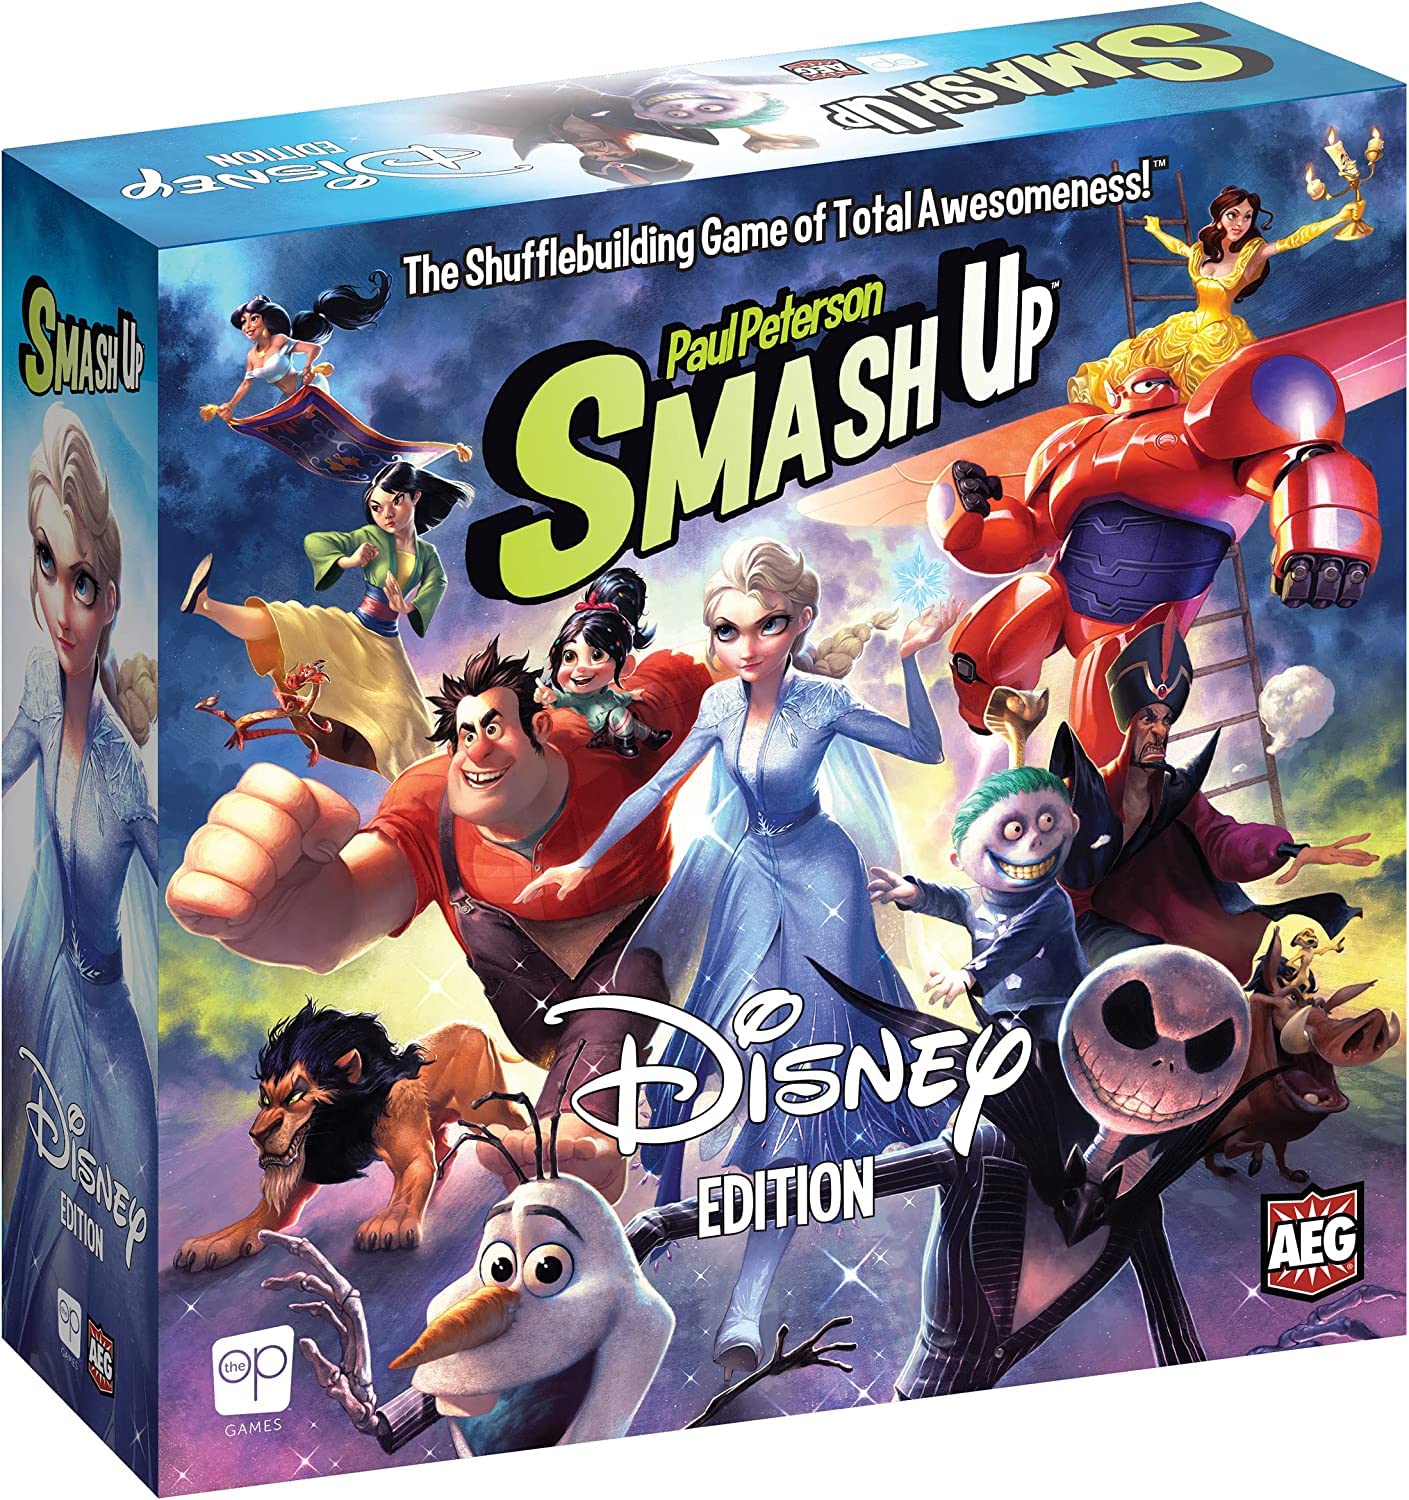 Smash Up: Disney Edition | Collectible Disney Card Game | Featuring Disney Characters from Frozen, Big Hero 6, The Lion King, Aladdin, The Nightmare Before Christmas, & More | Standalone Smash Up Game